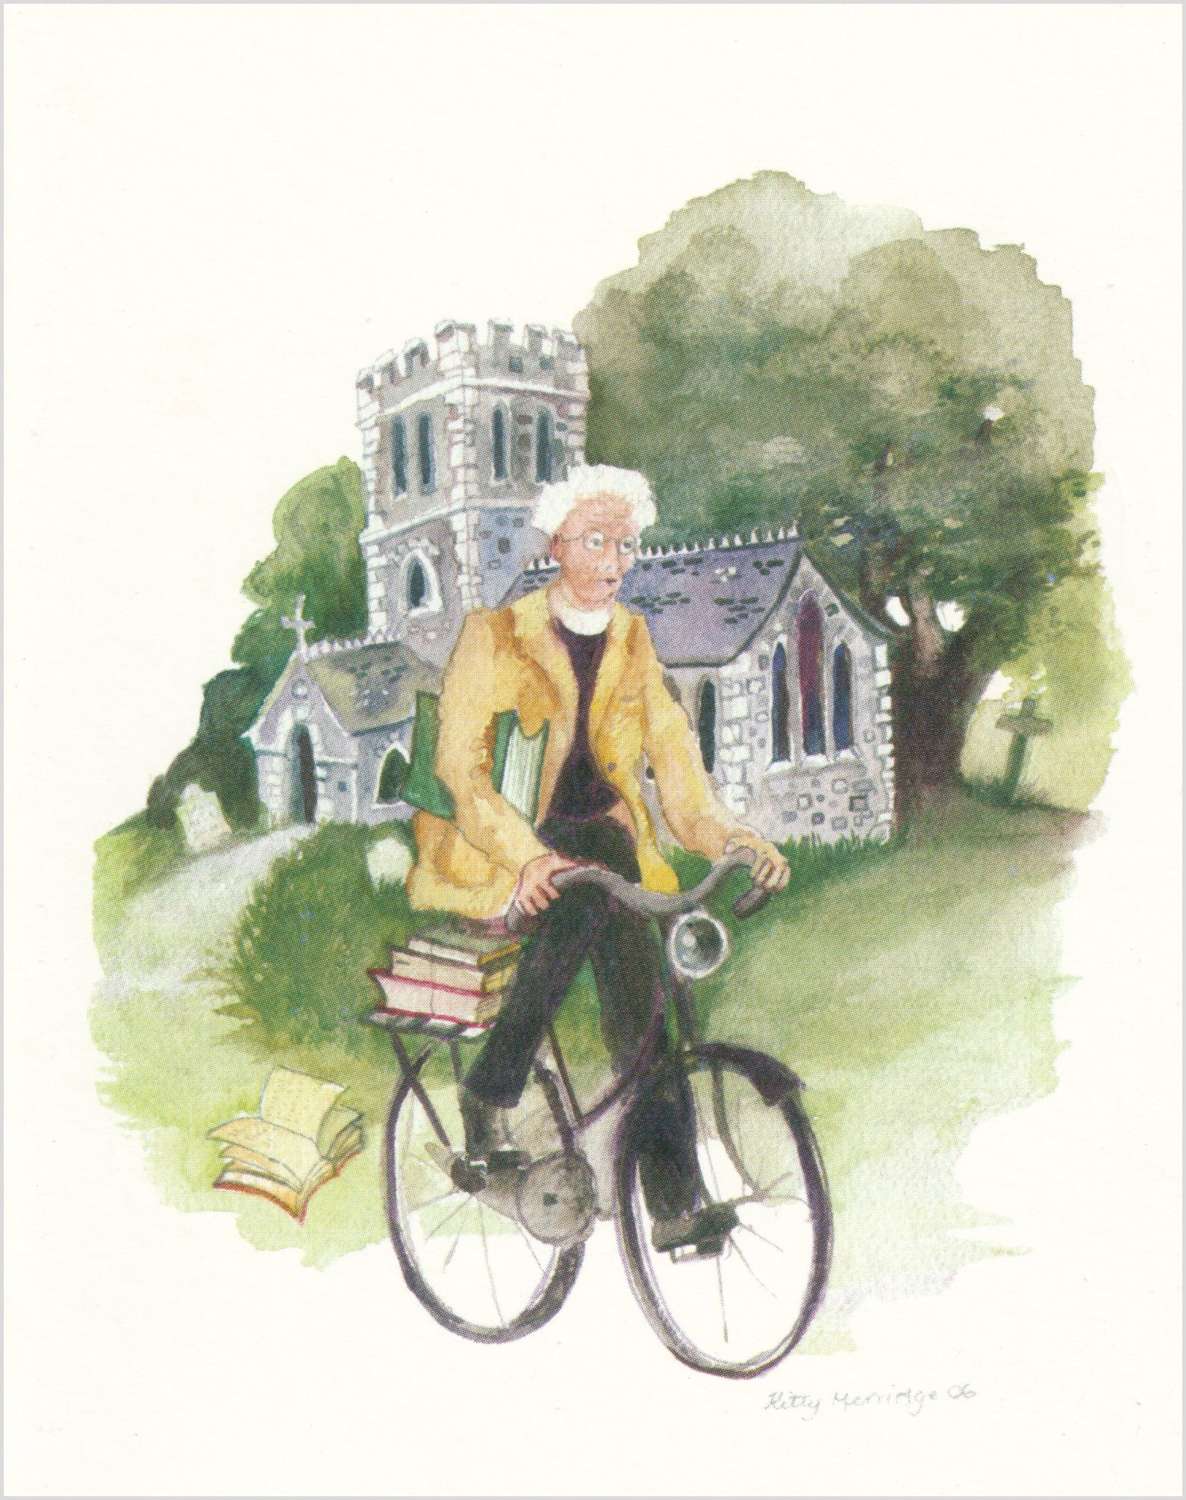 Vicar on a bicycle